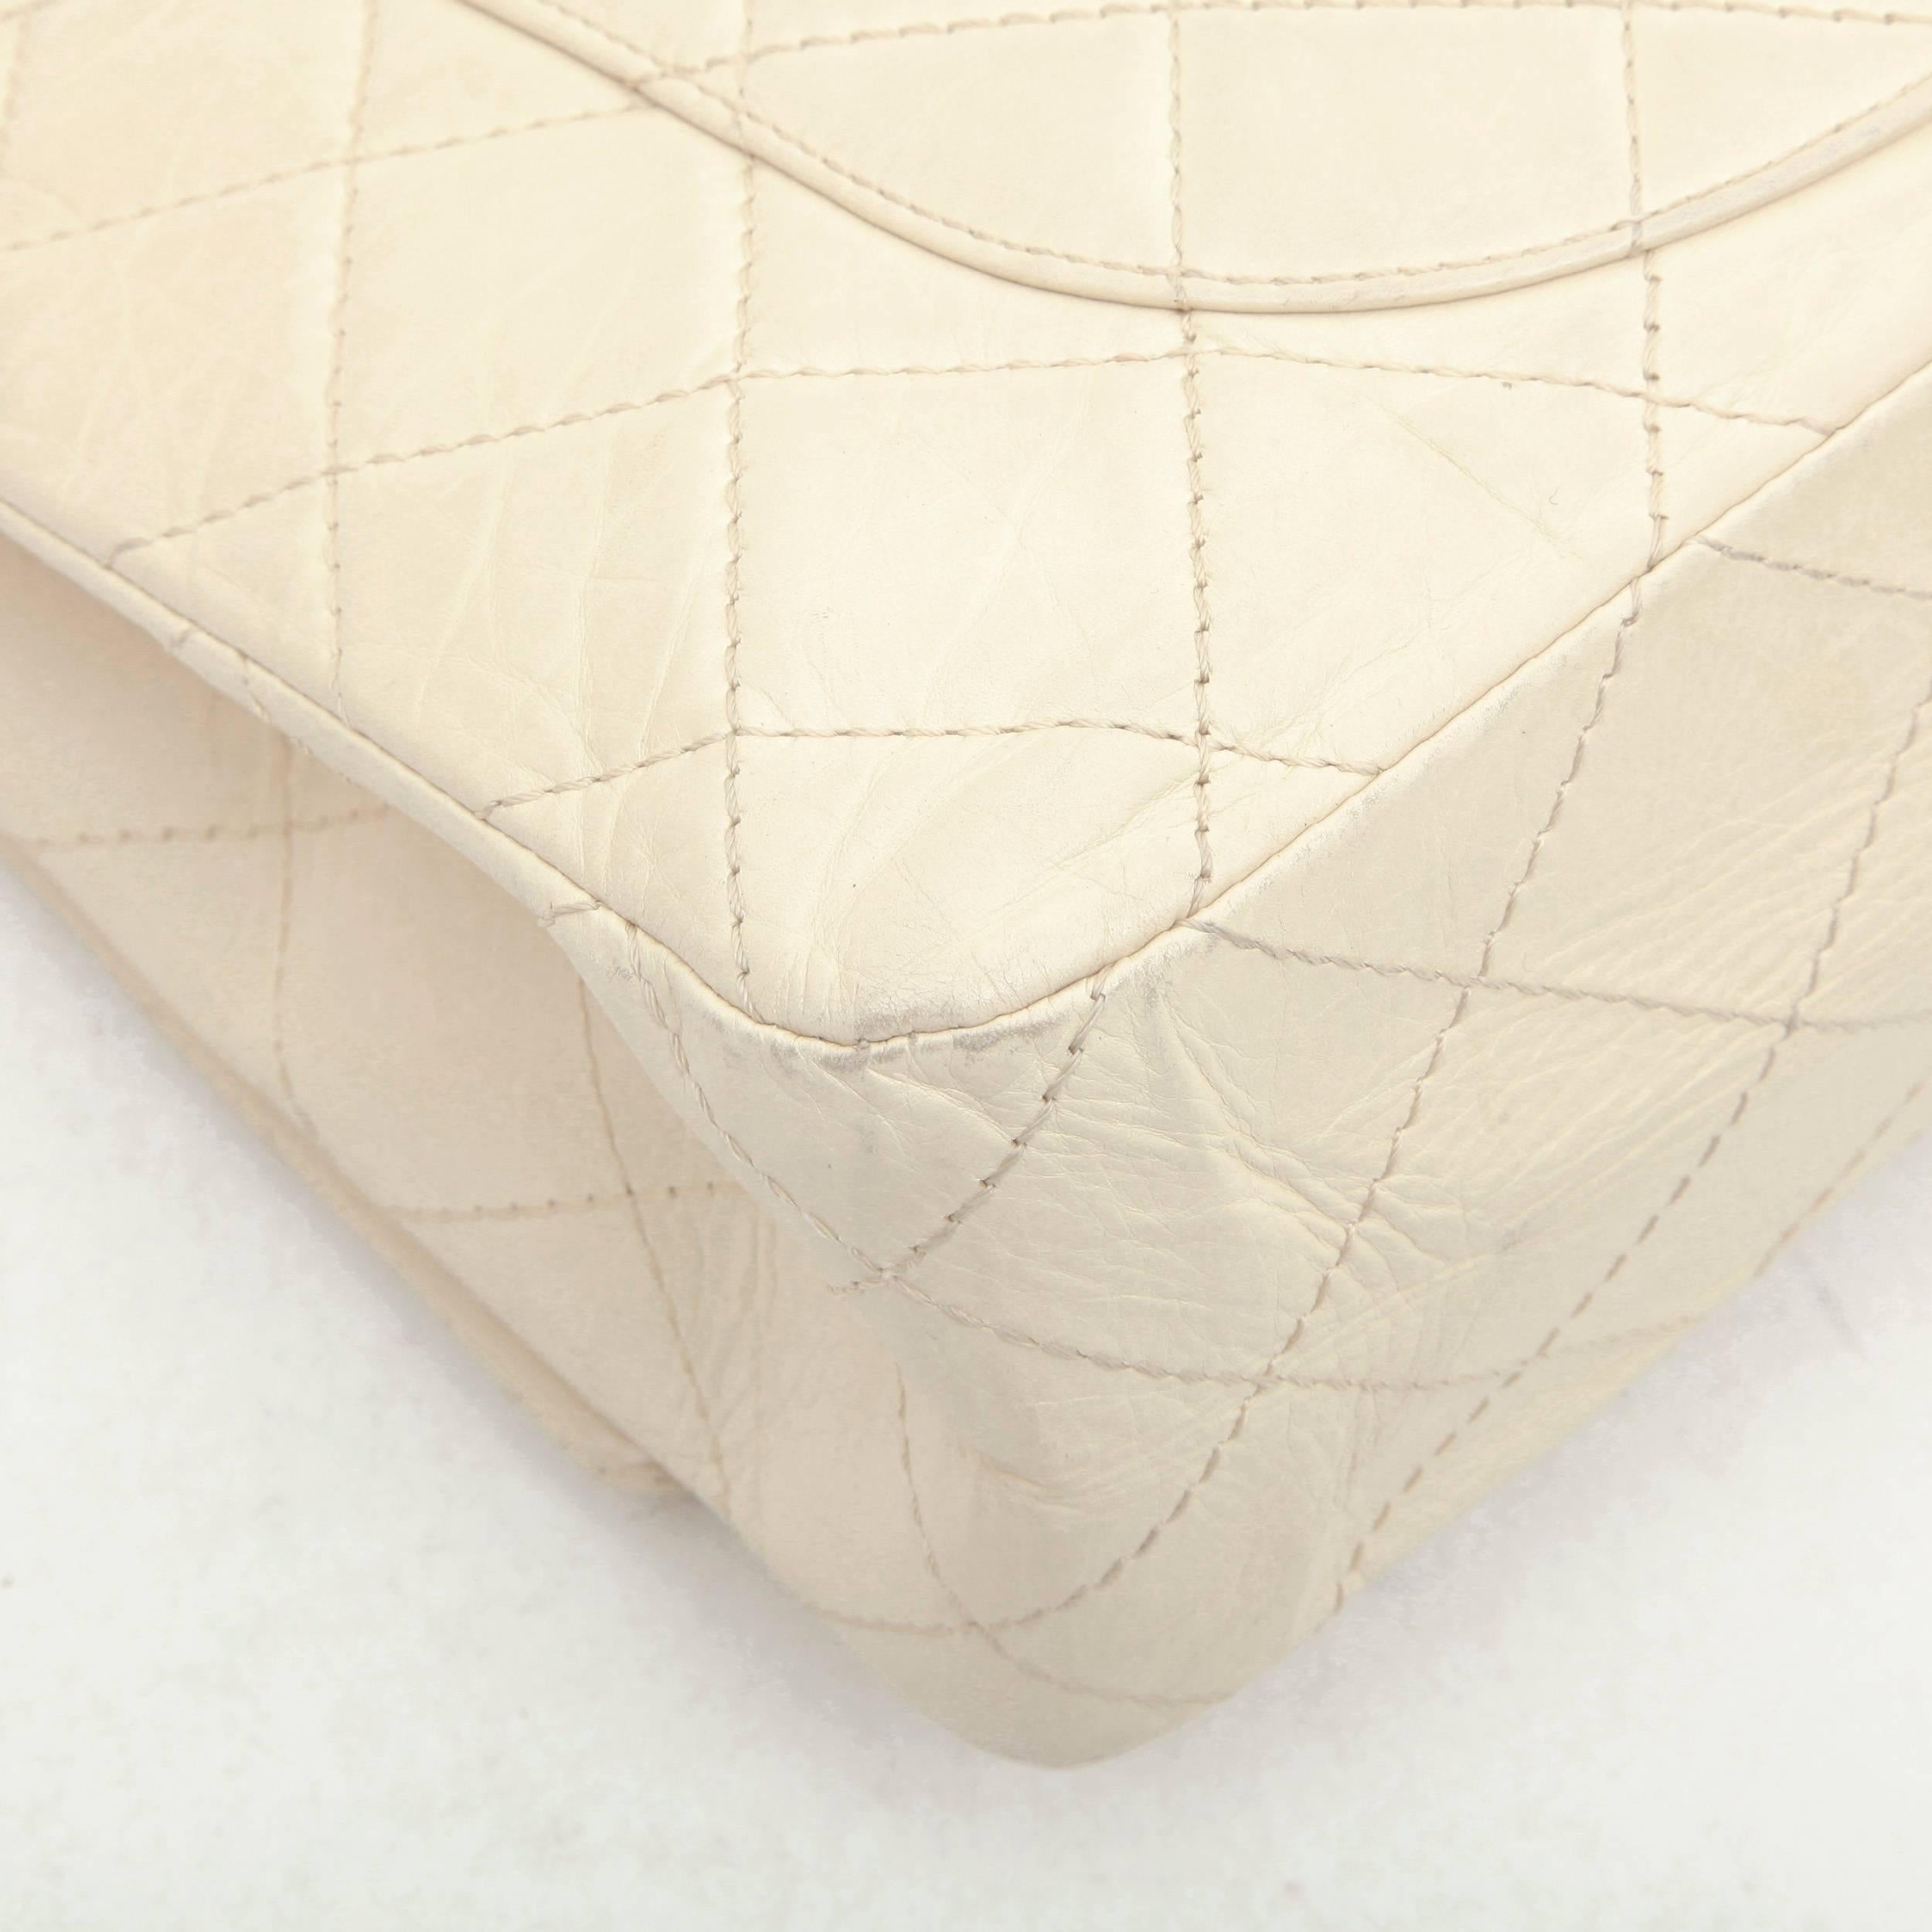 CHANEL 'Maxi Jumbo' Double Flap Bag in Aged Ivory Leather In Excellent Condition For Sale In Paris, FR